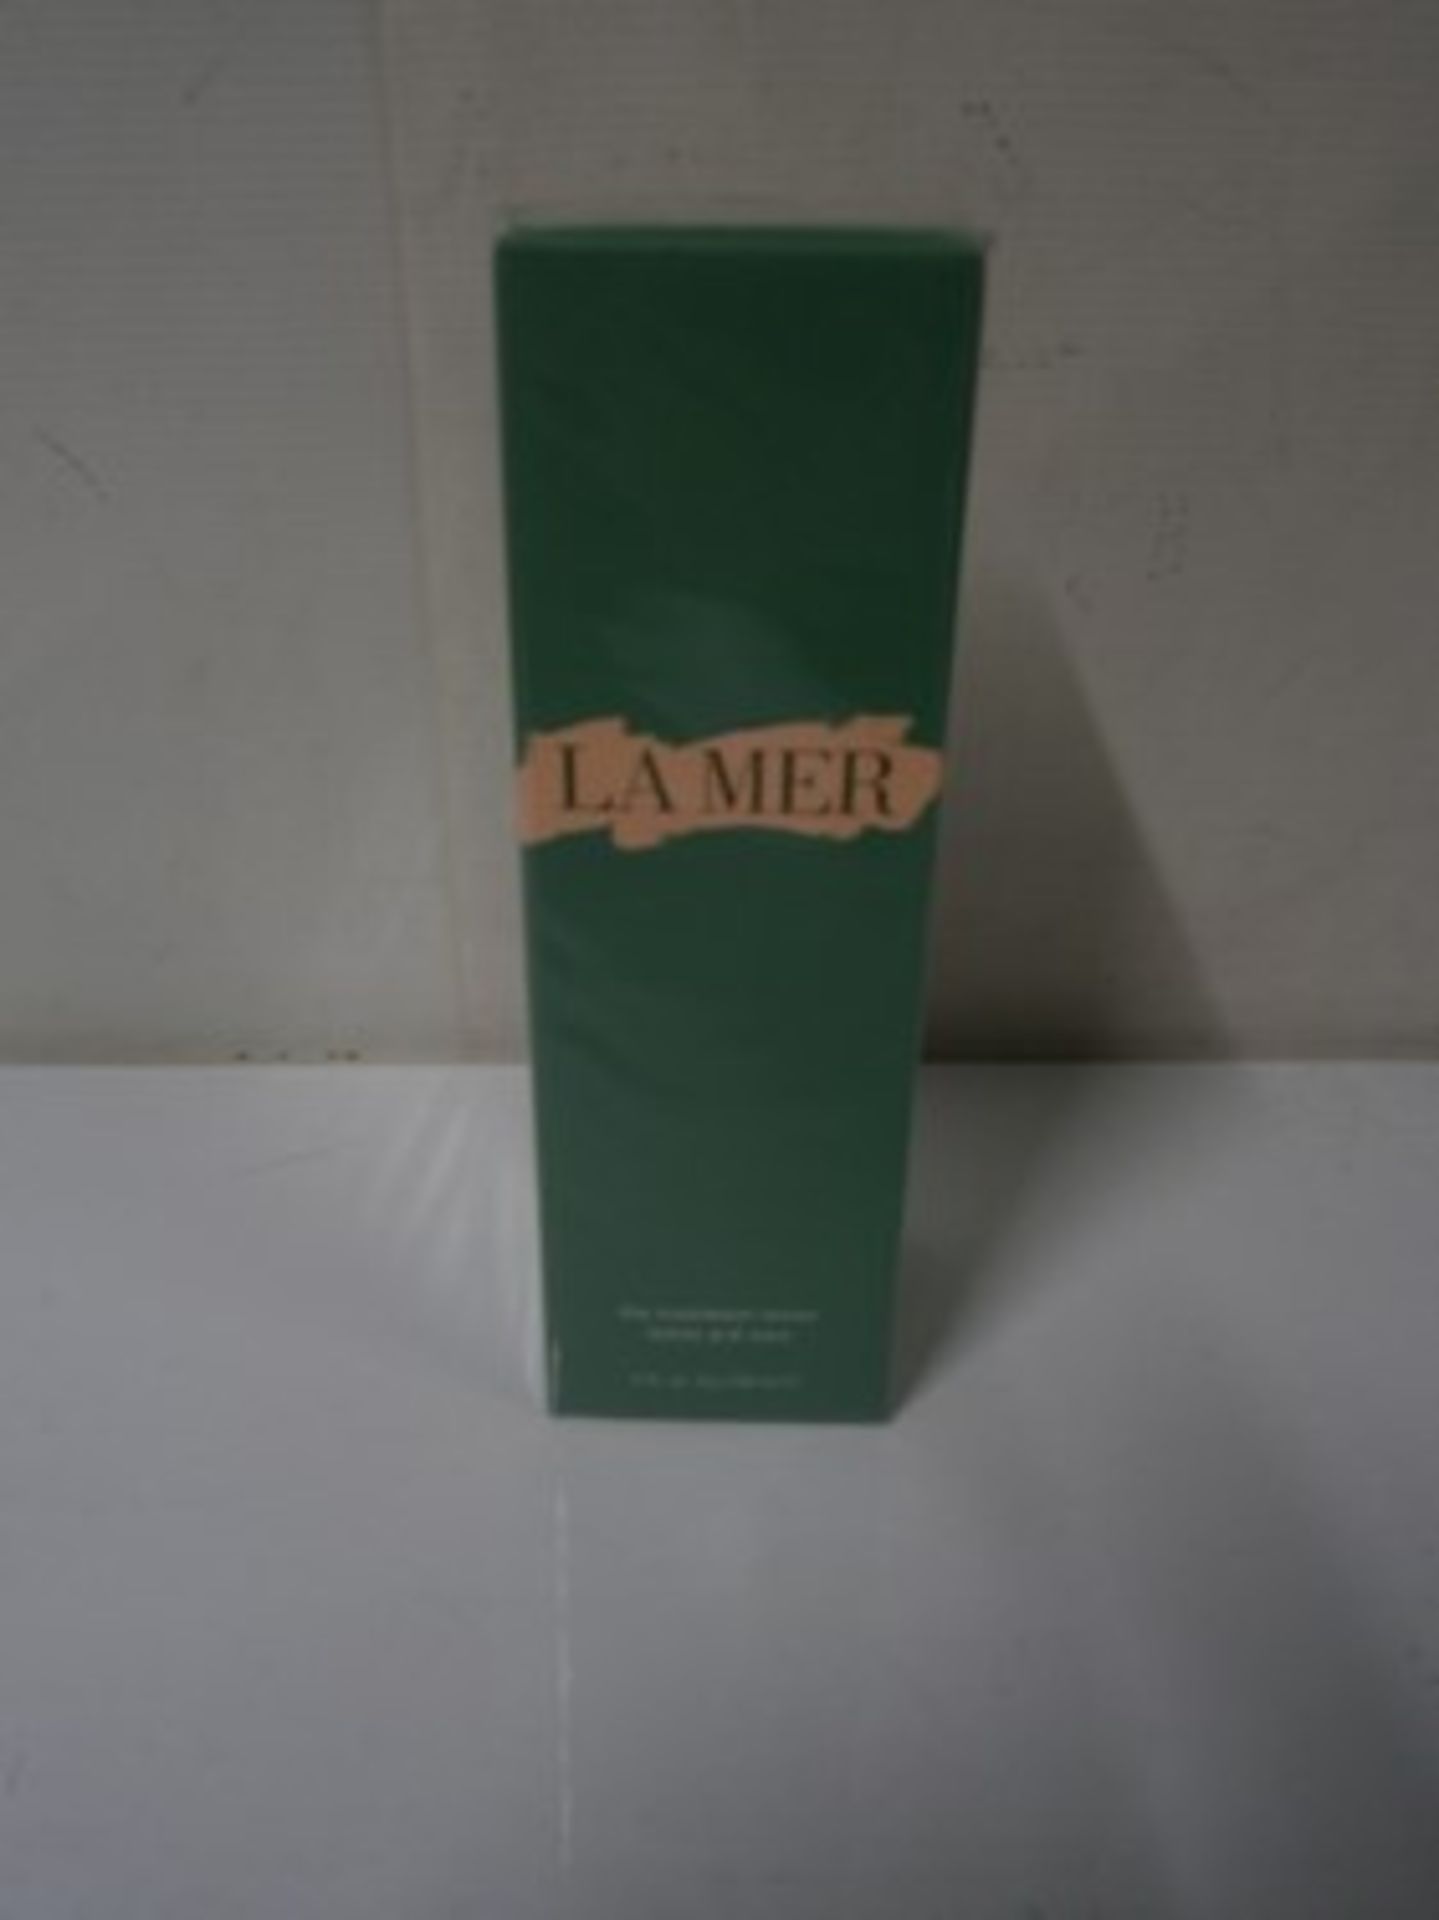 1 x 150ml bottle of La Mer The Treatment lotion - Sealed new in box (C14A)